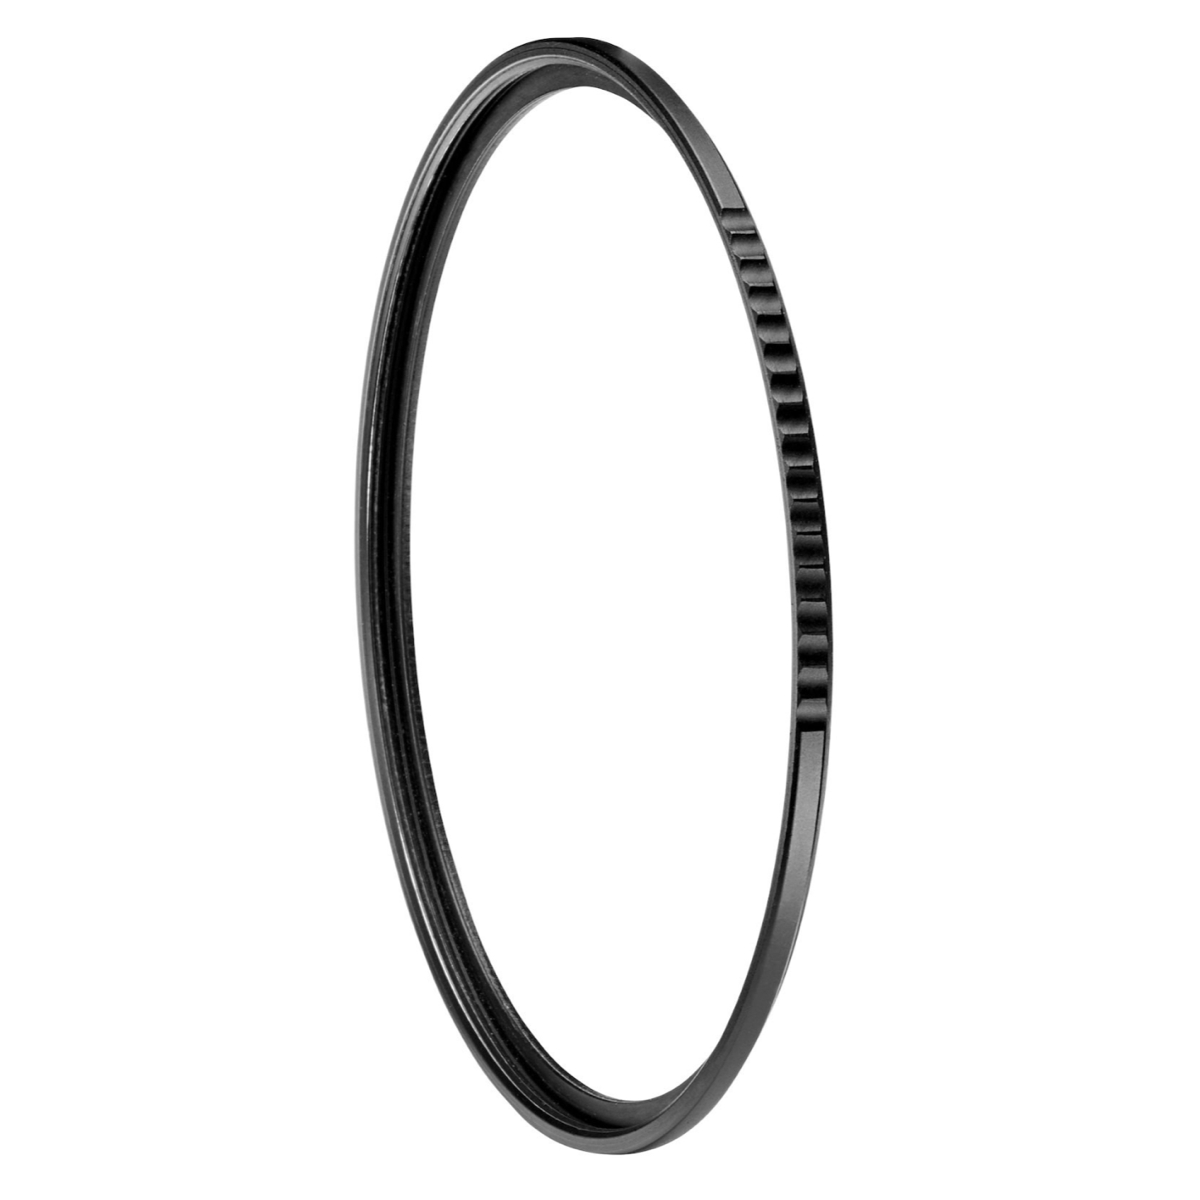 Manfrotto XUME 58mm Filter Adapter